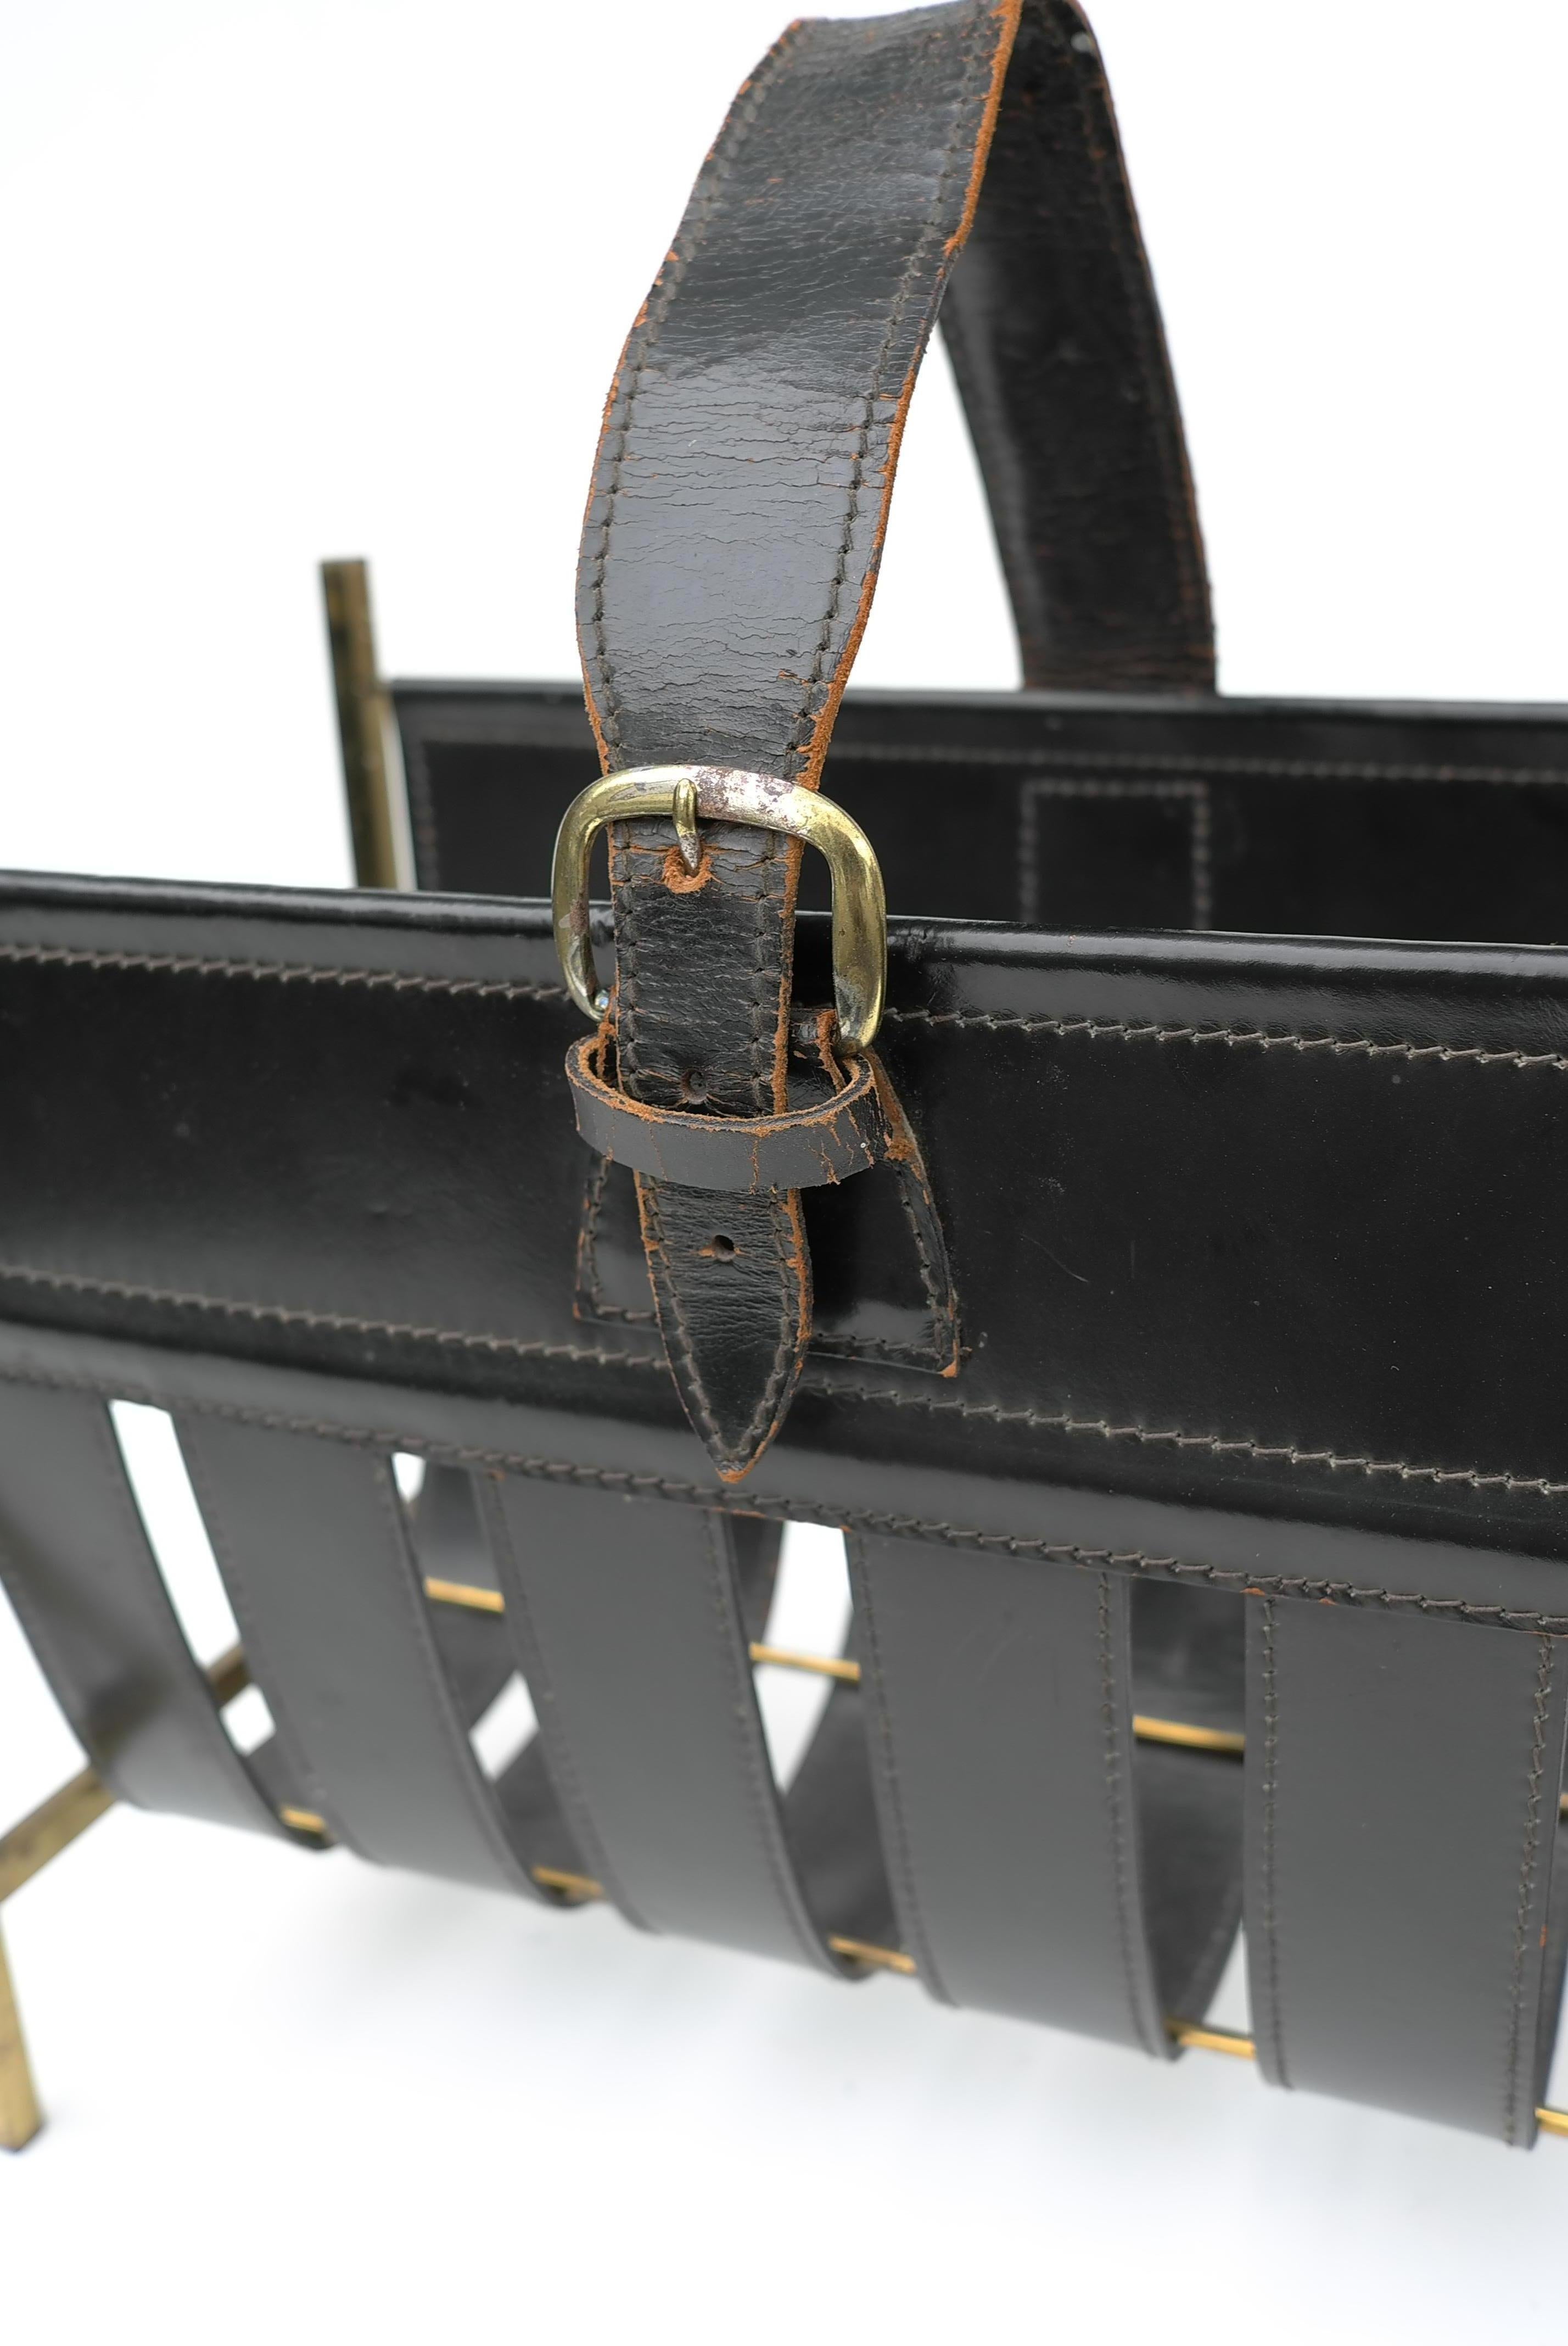 Jacques Adnet Magazine Rack in Black Sling Leather and Brass, France 1960's 2